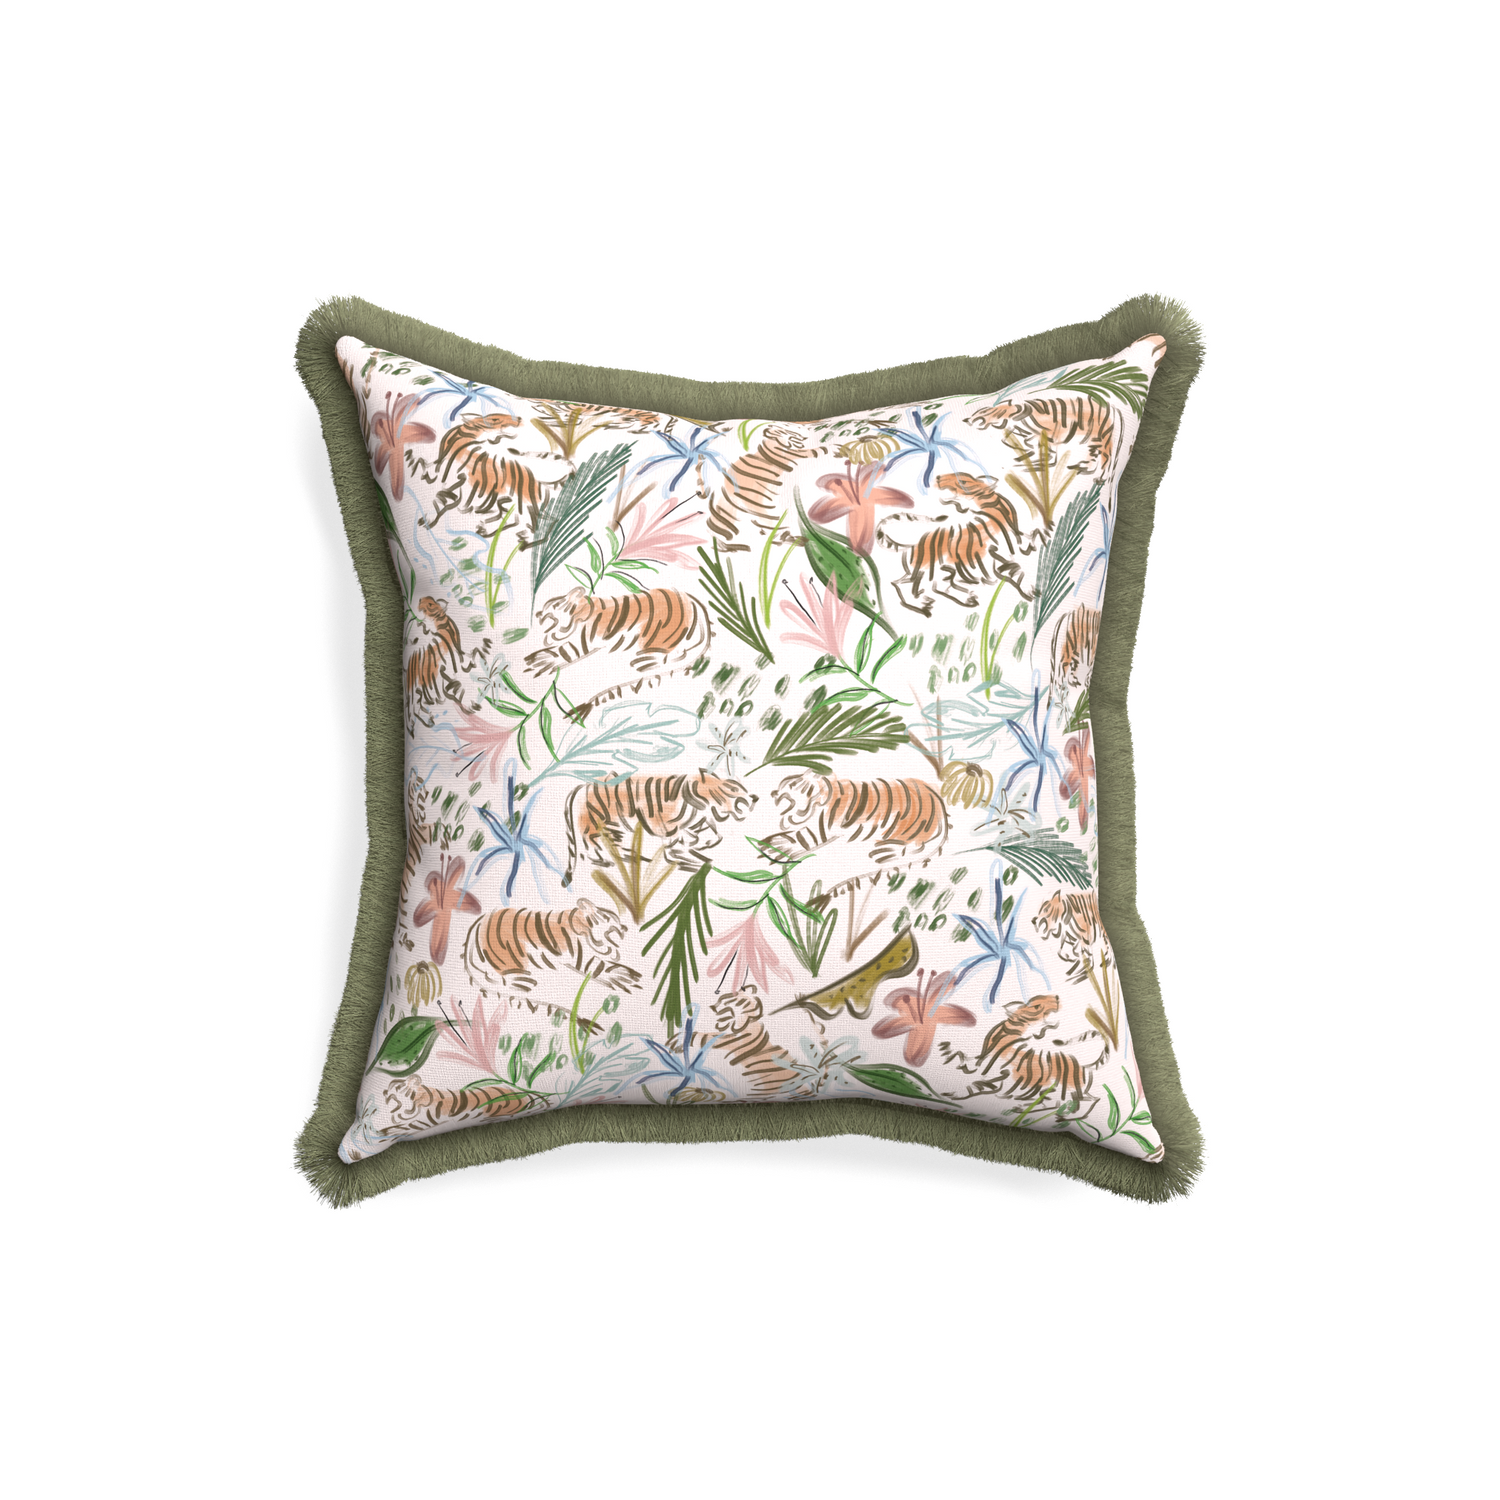 18-square frida pink custom pink chinoiserie tigerpillow with sage fringe on white background